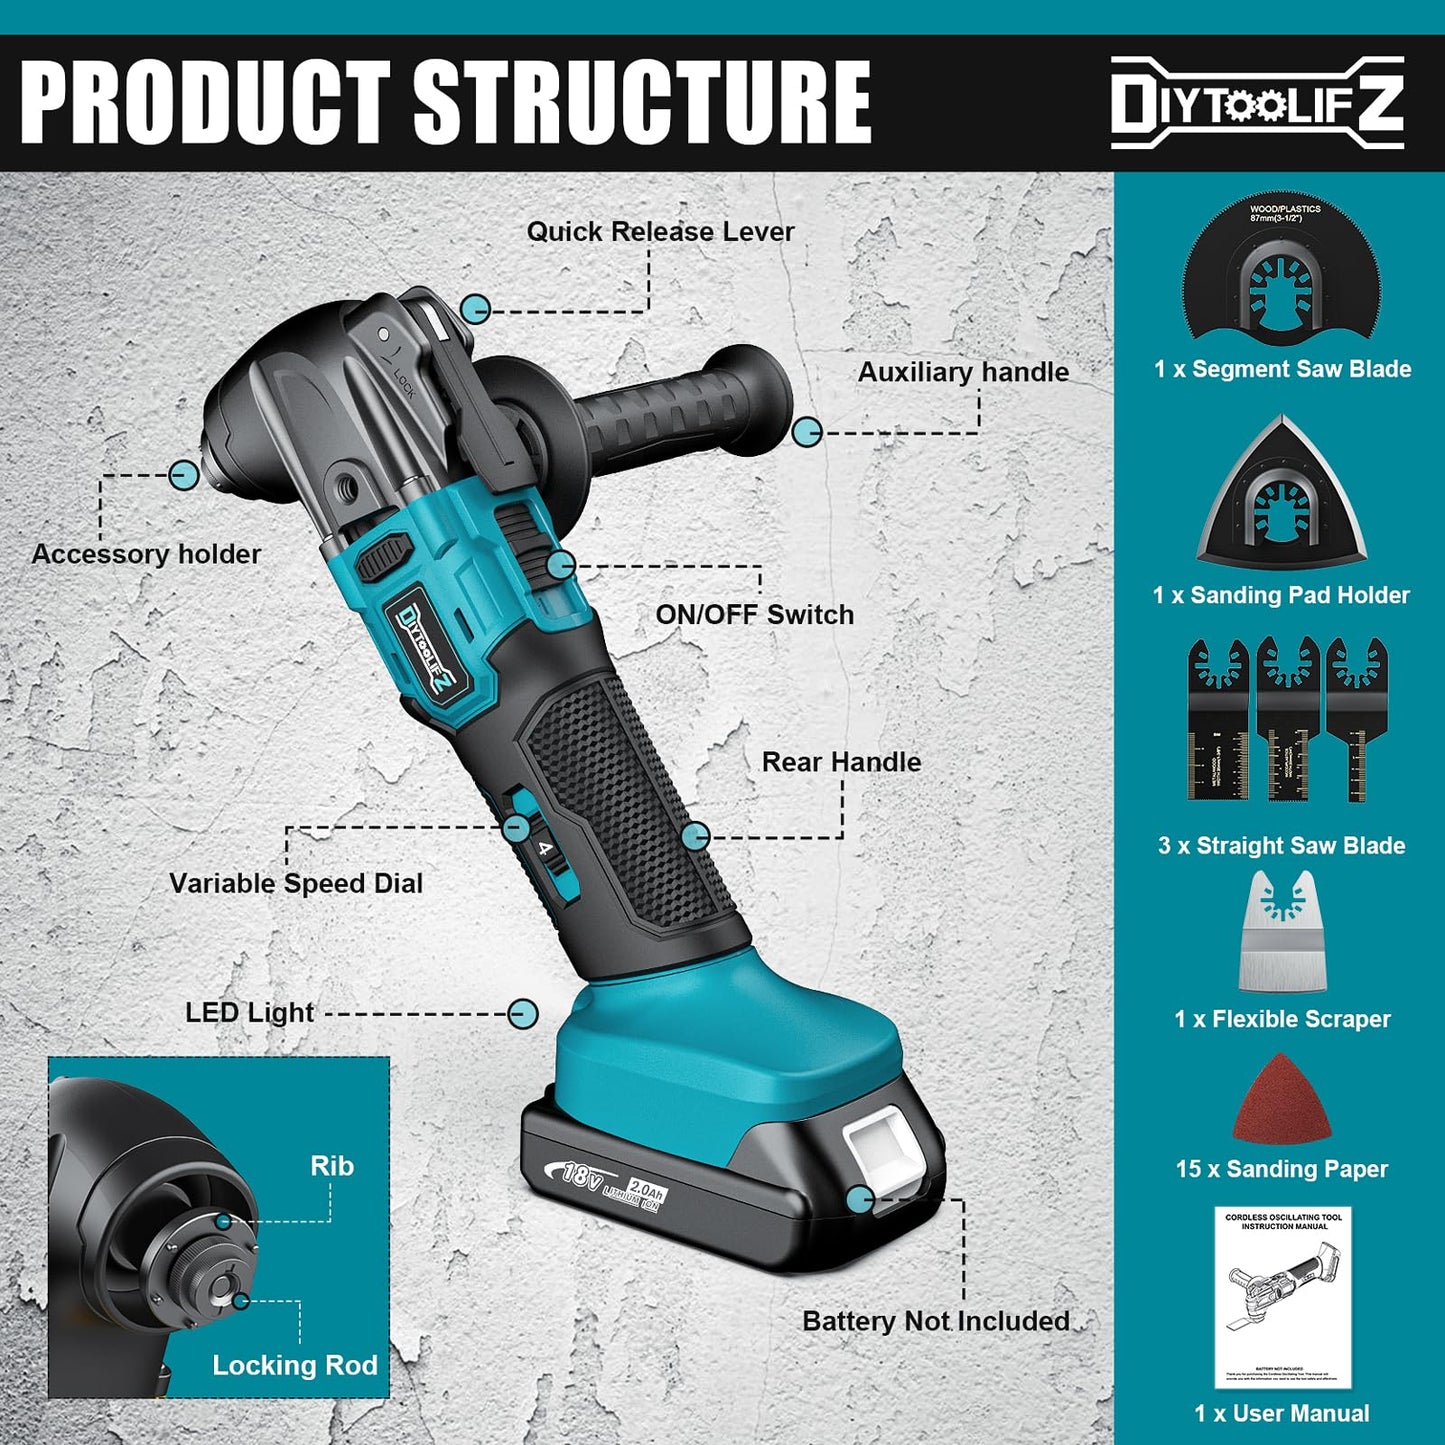 Cordless Oscillating Tool for Makita 18V Battery, 6 Variable Speed Brushless-Motor Tool, Oscillating multi tool kit for Cutting Wood Drywall Nails